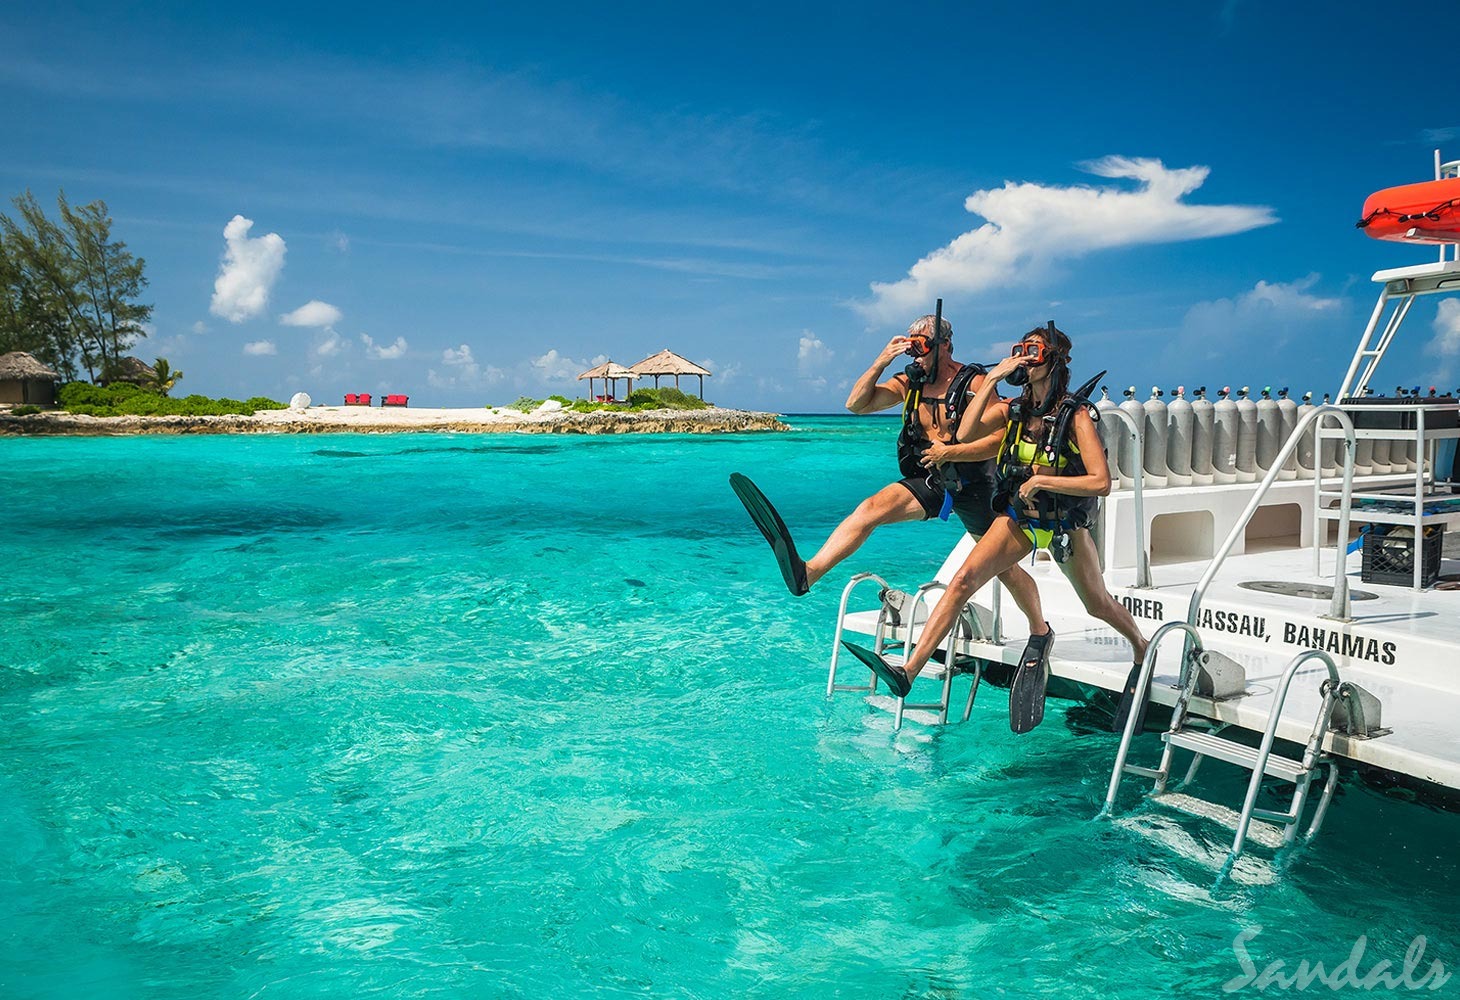 Where are the Sandals Resorts locations? Which Sandals Resort is best?